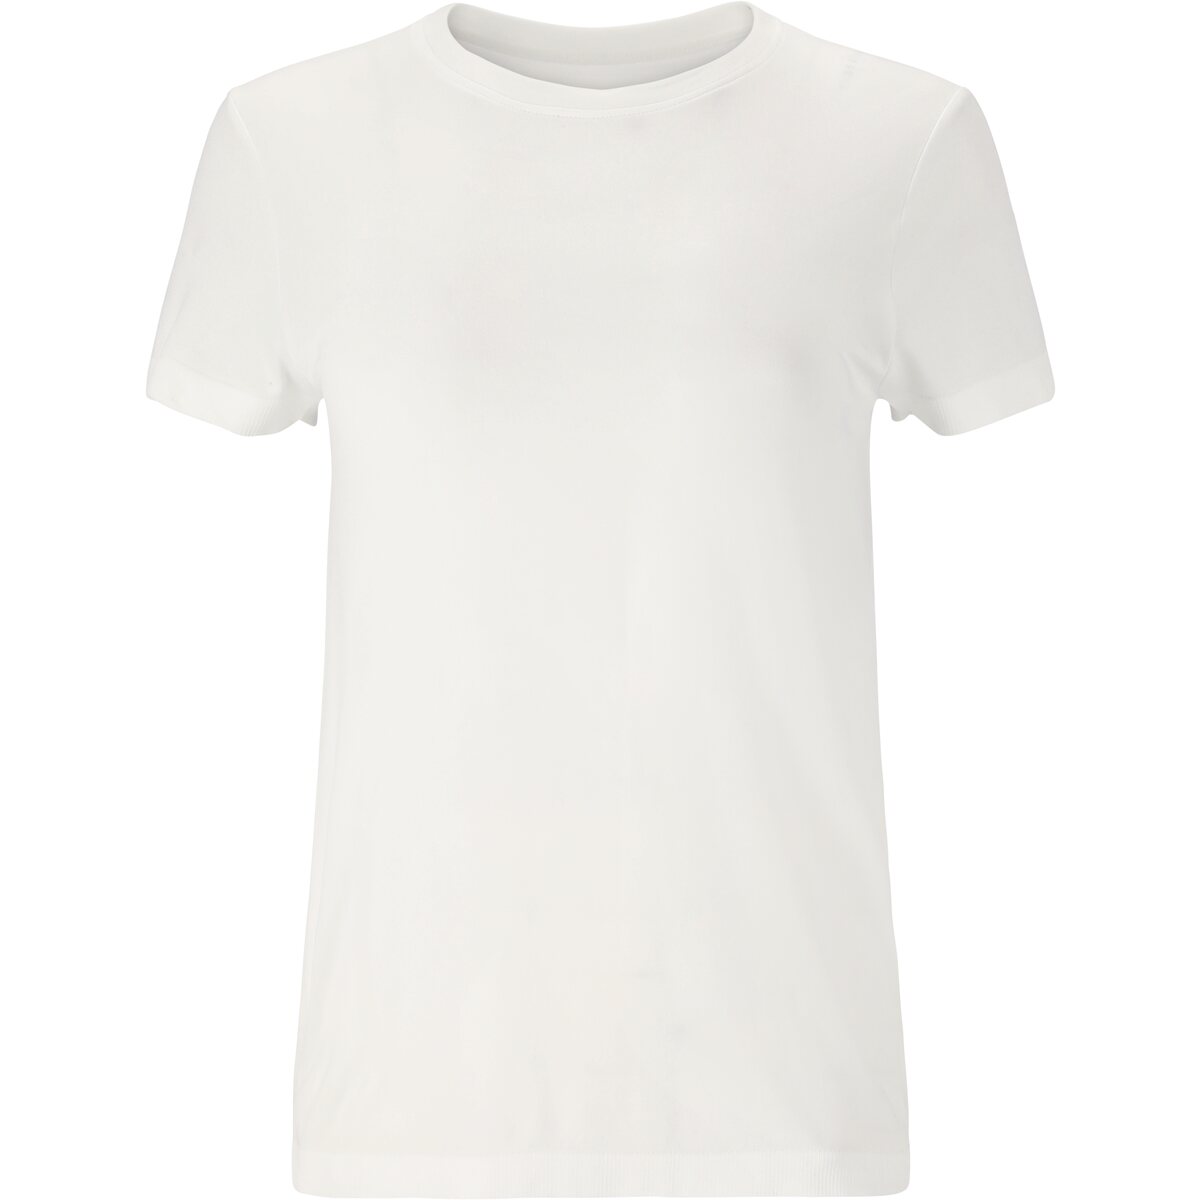 Athlecia Julee Womenswear Loose Fit Seamless Tee - White 6 Shaws Department Stores